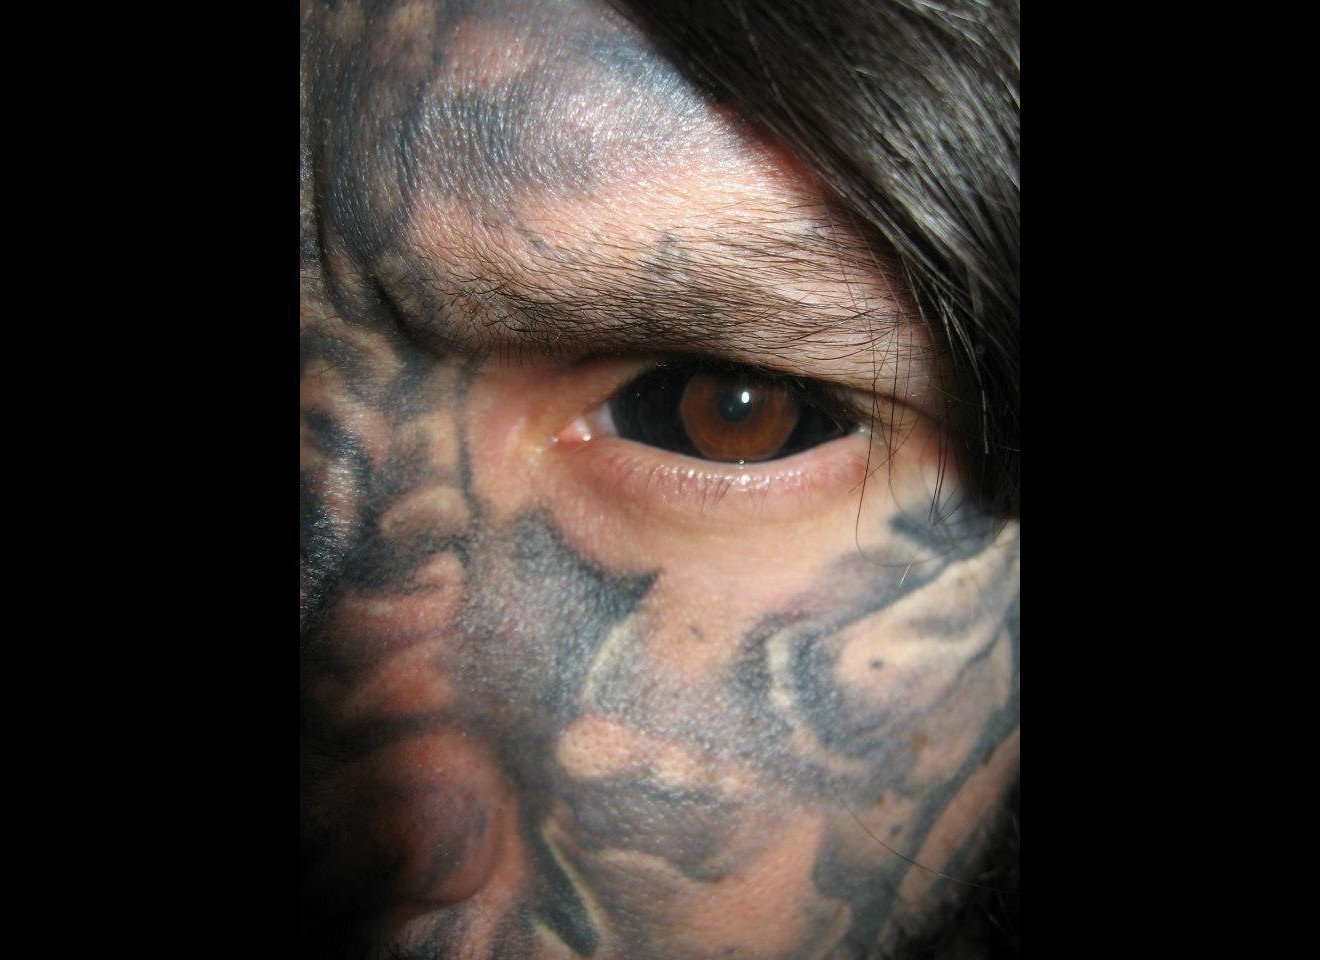 Eye Tattoos: What's up with that? | Slade & Baker Vision